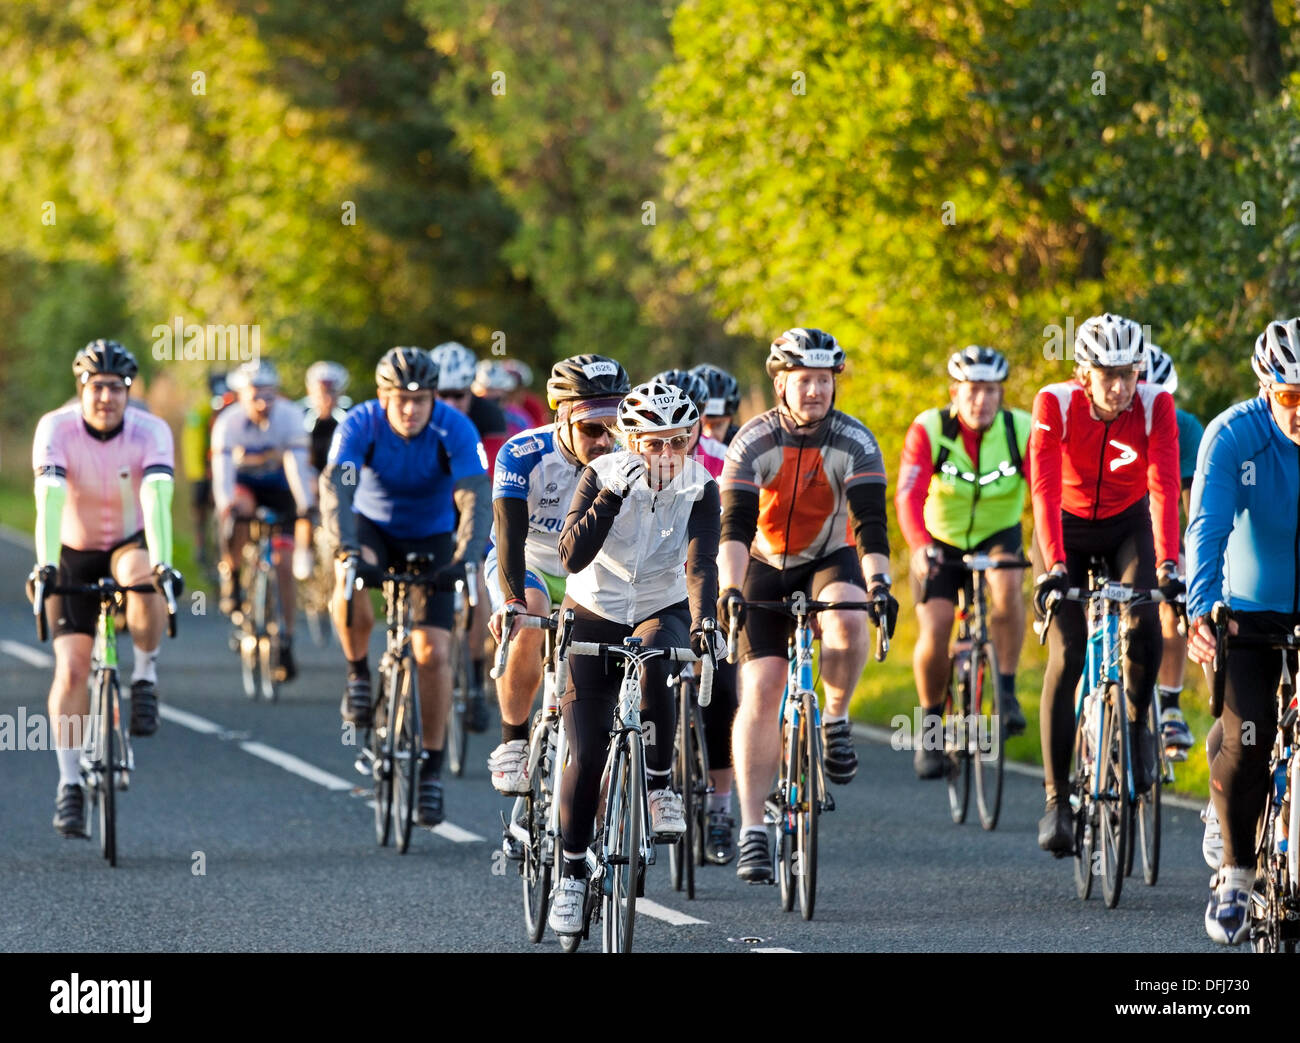 Marwood, County Durham, UK . 06th Oct, 2013.  Competitors on the first hill of the Marie Curie Cancer Care Etape Pennines 2013 Cycle Event. The cyclists started the race at first light and will cover 84 miles and 8,532 feet of ascent. Credit:  David Forster/Alamy Live News Stock Photo